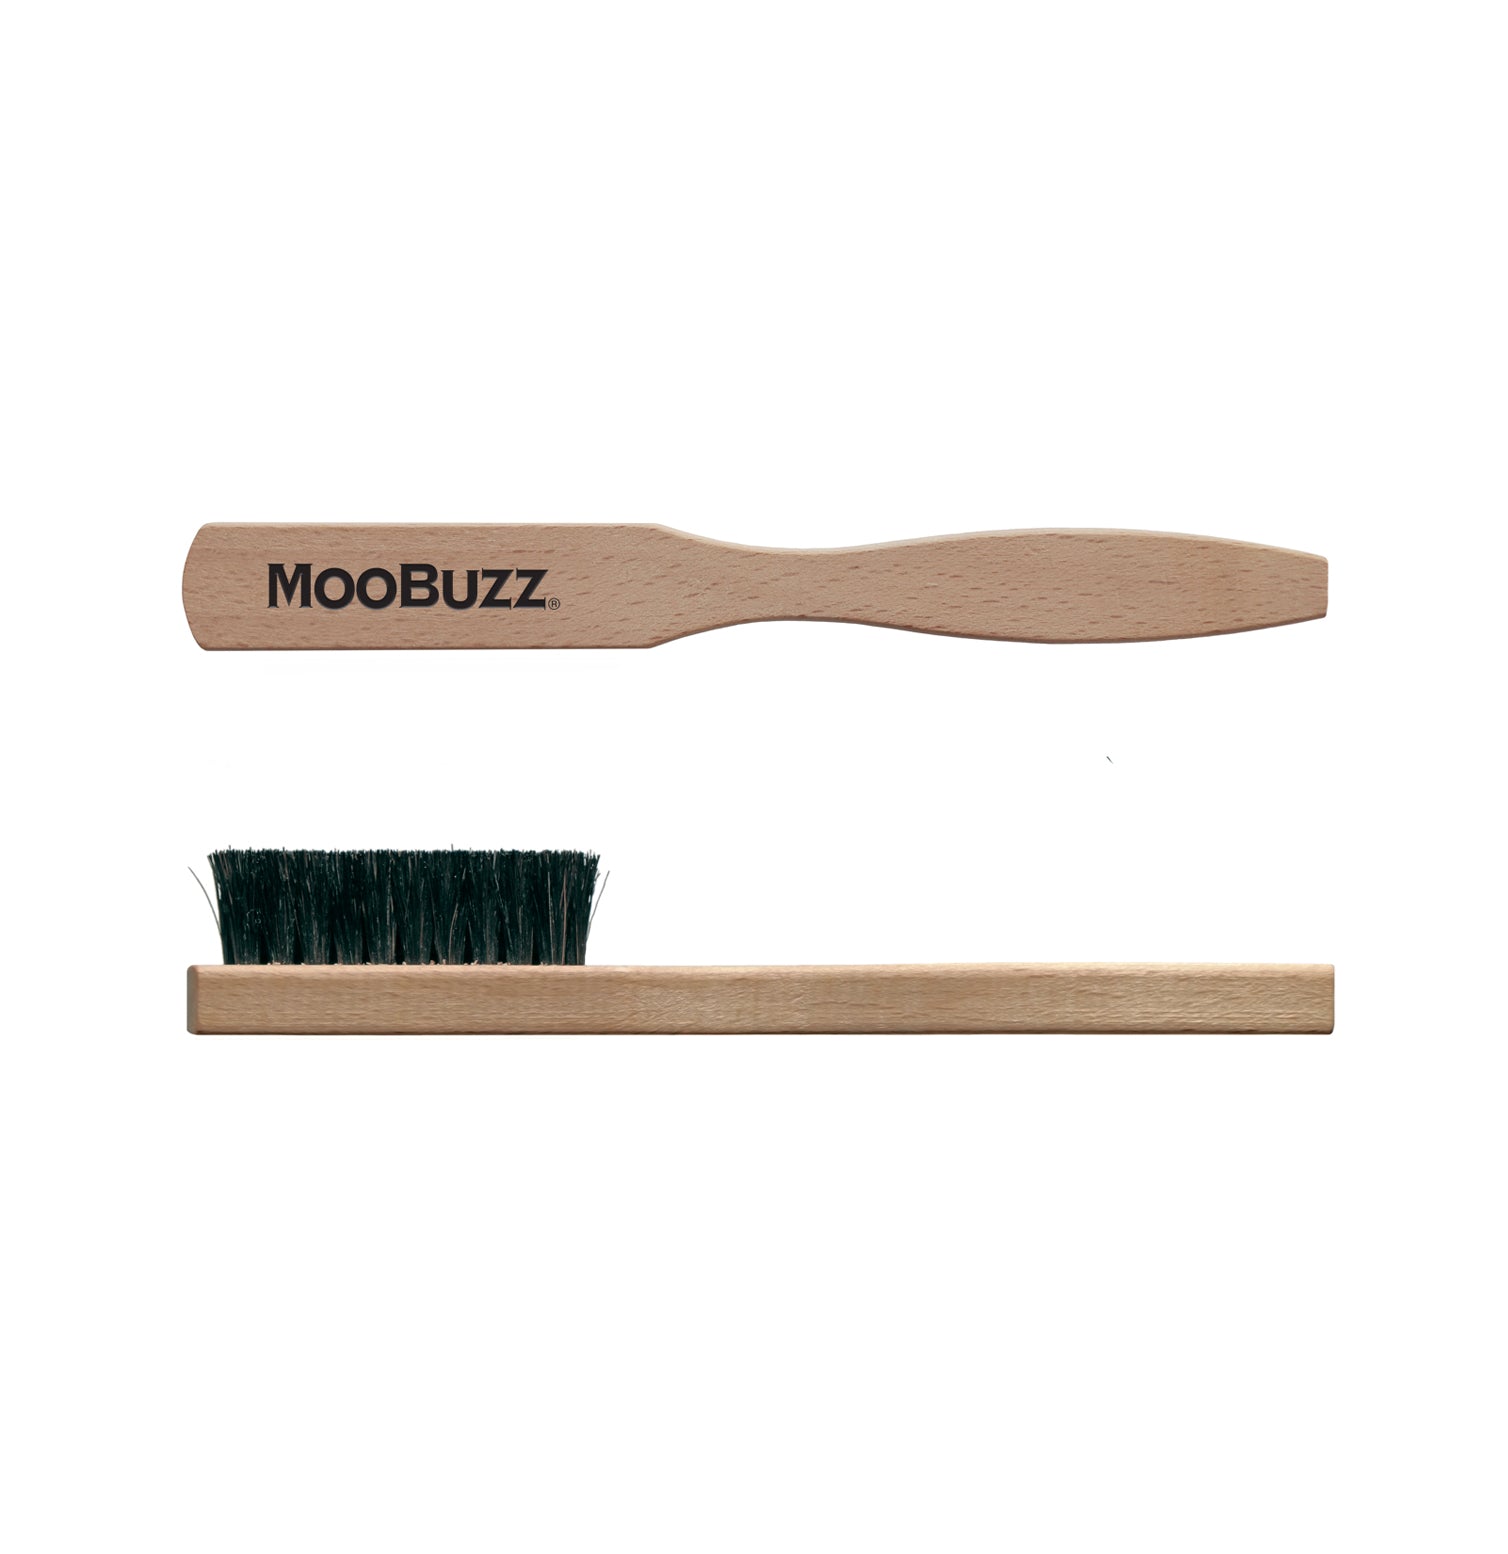 Top and side view with shaped wooden handle and horsehair bristles for cleaning and shining leather.